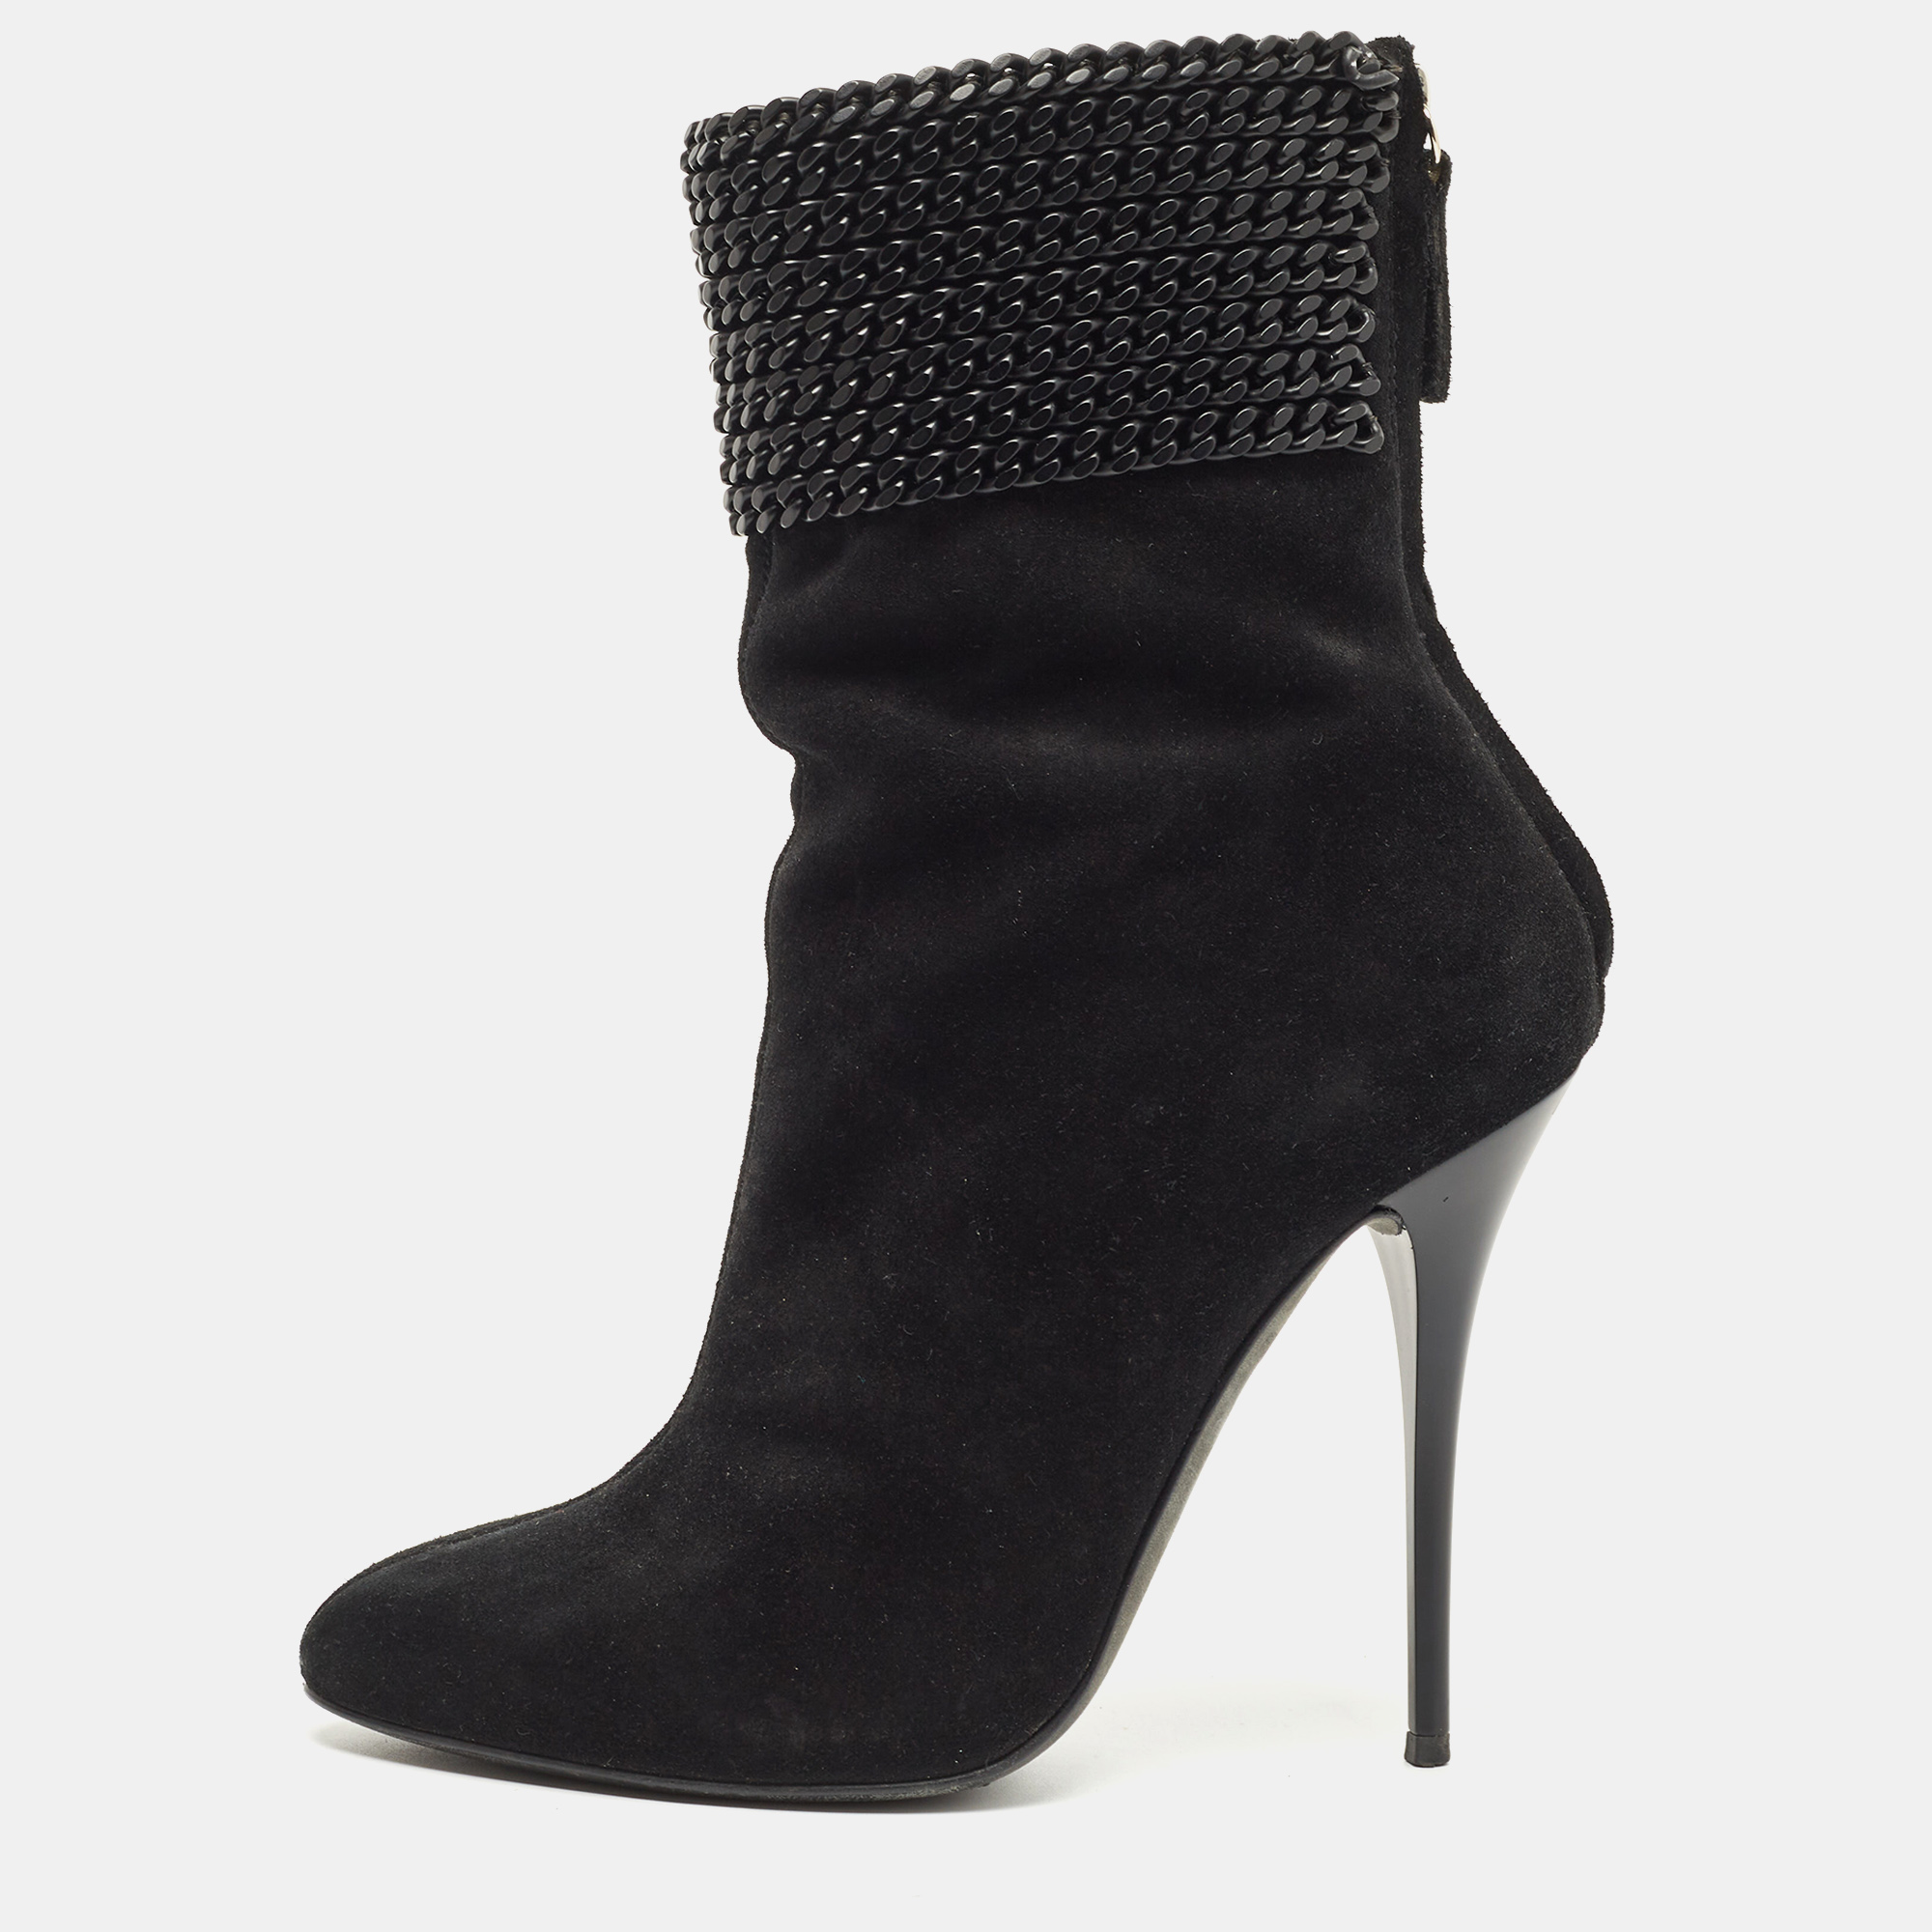 Giuseppe Zanotti Black Suede And Chain Ankle Boots Size 38